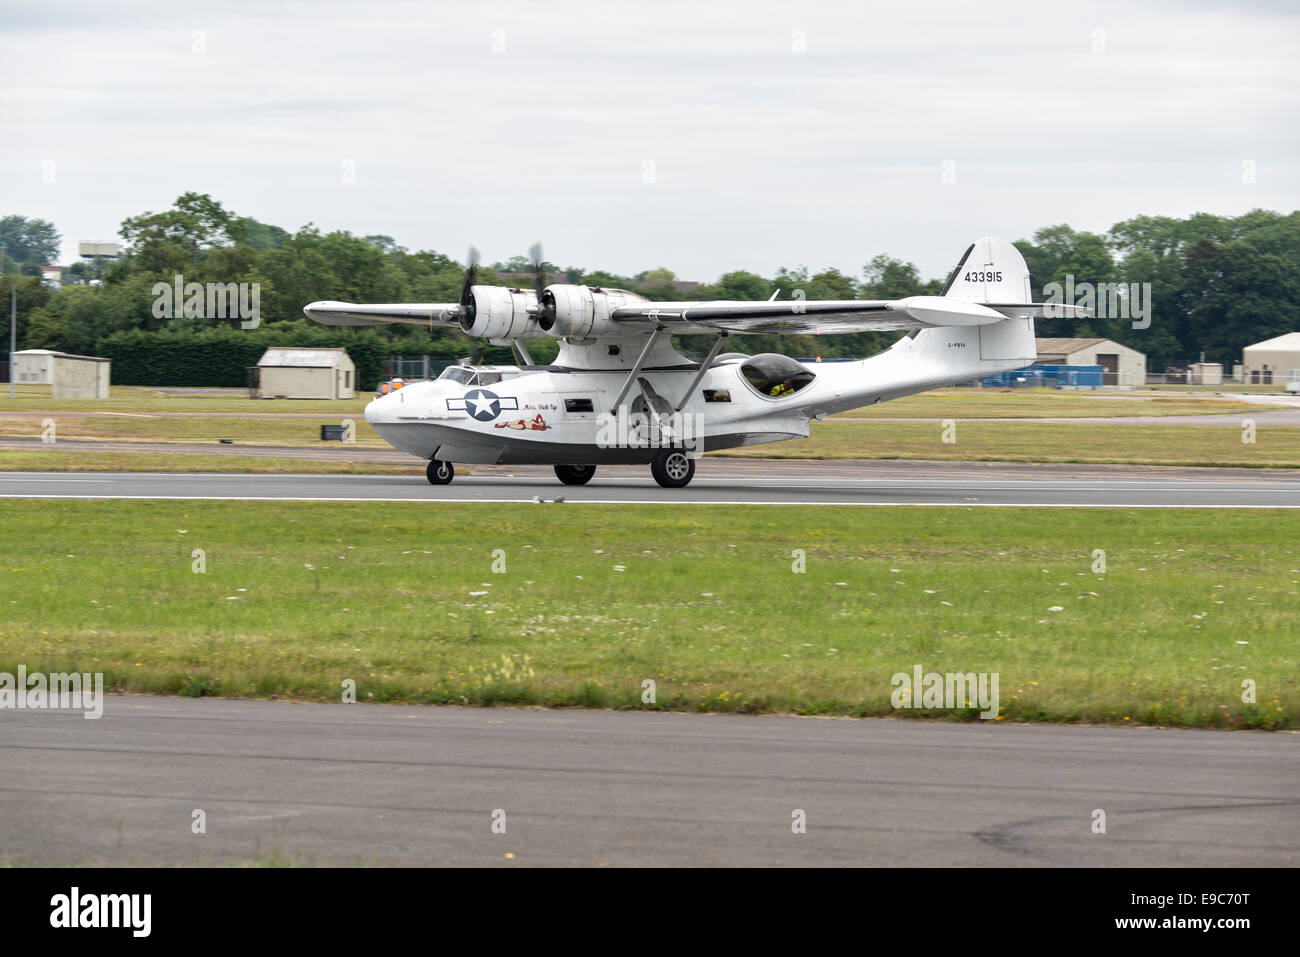 Plane Sailing's beautiful PBY Catalina arrives at Fairford to participate in the 2014 Royal International Air Tattoo Stock Photo